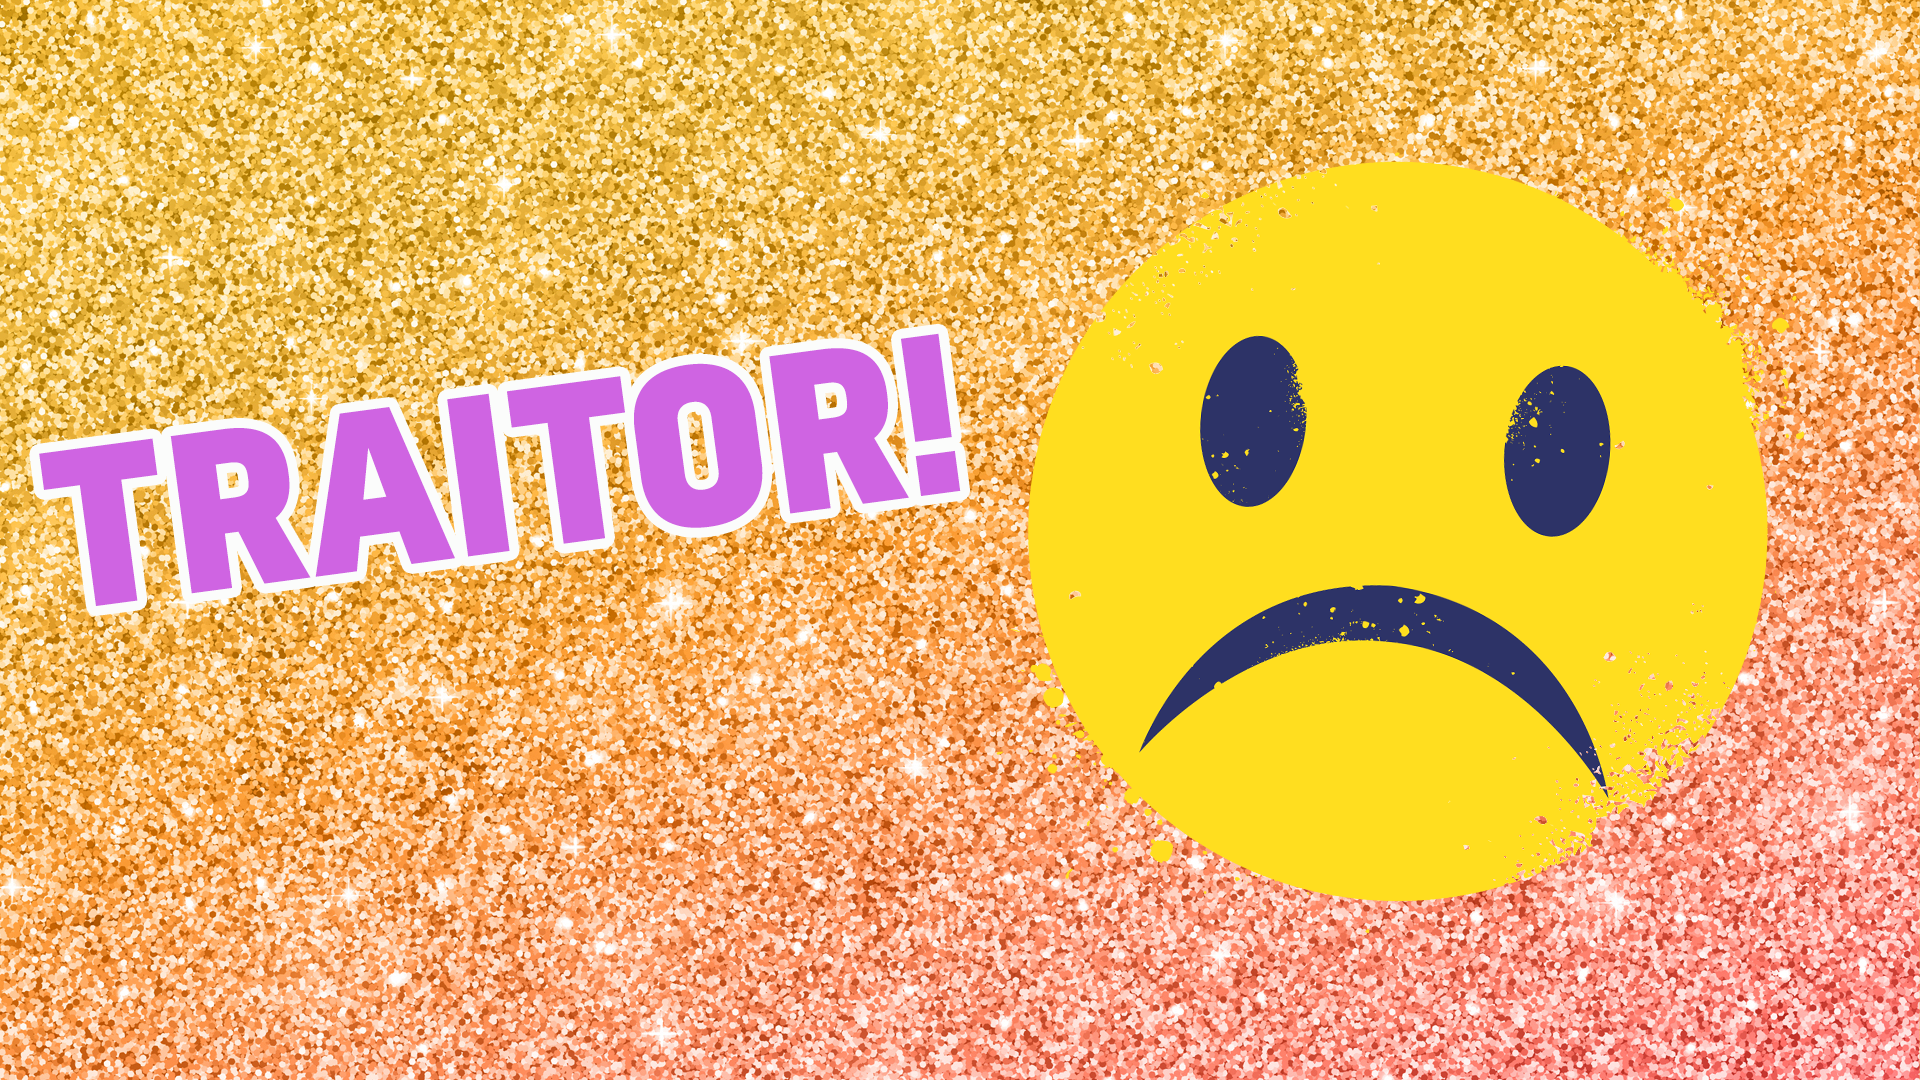 Your fave in traitor! You're into mopey ballads and you love a good ol' cry! Traitor is the perf antidote to heartbreak!